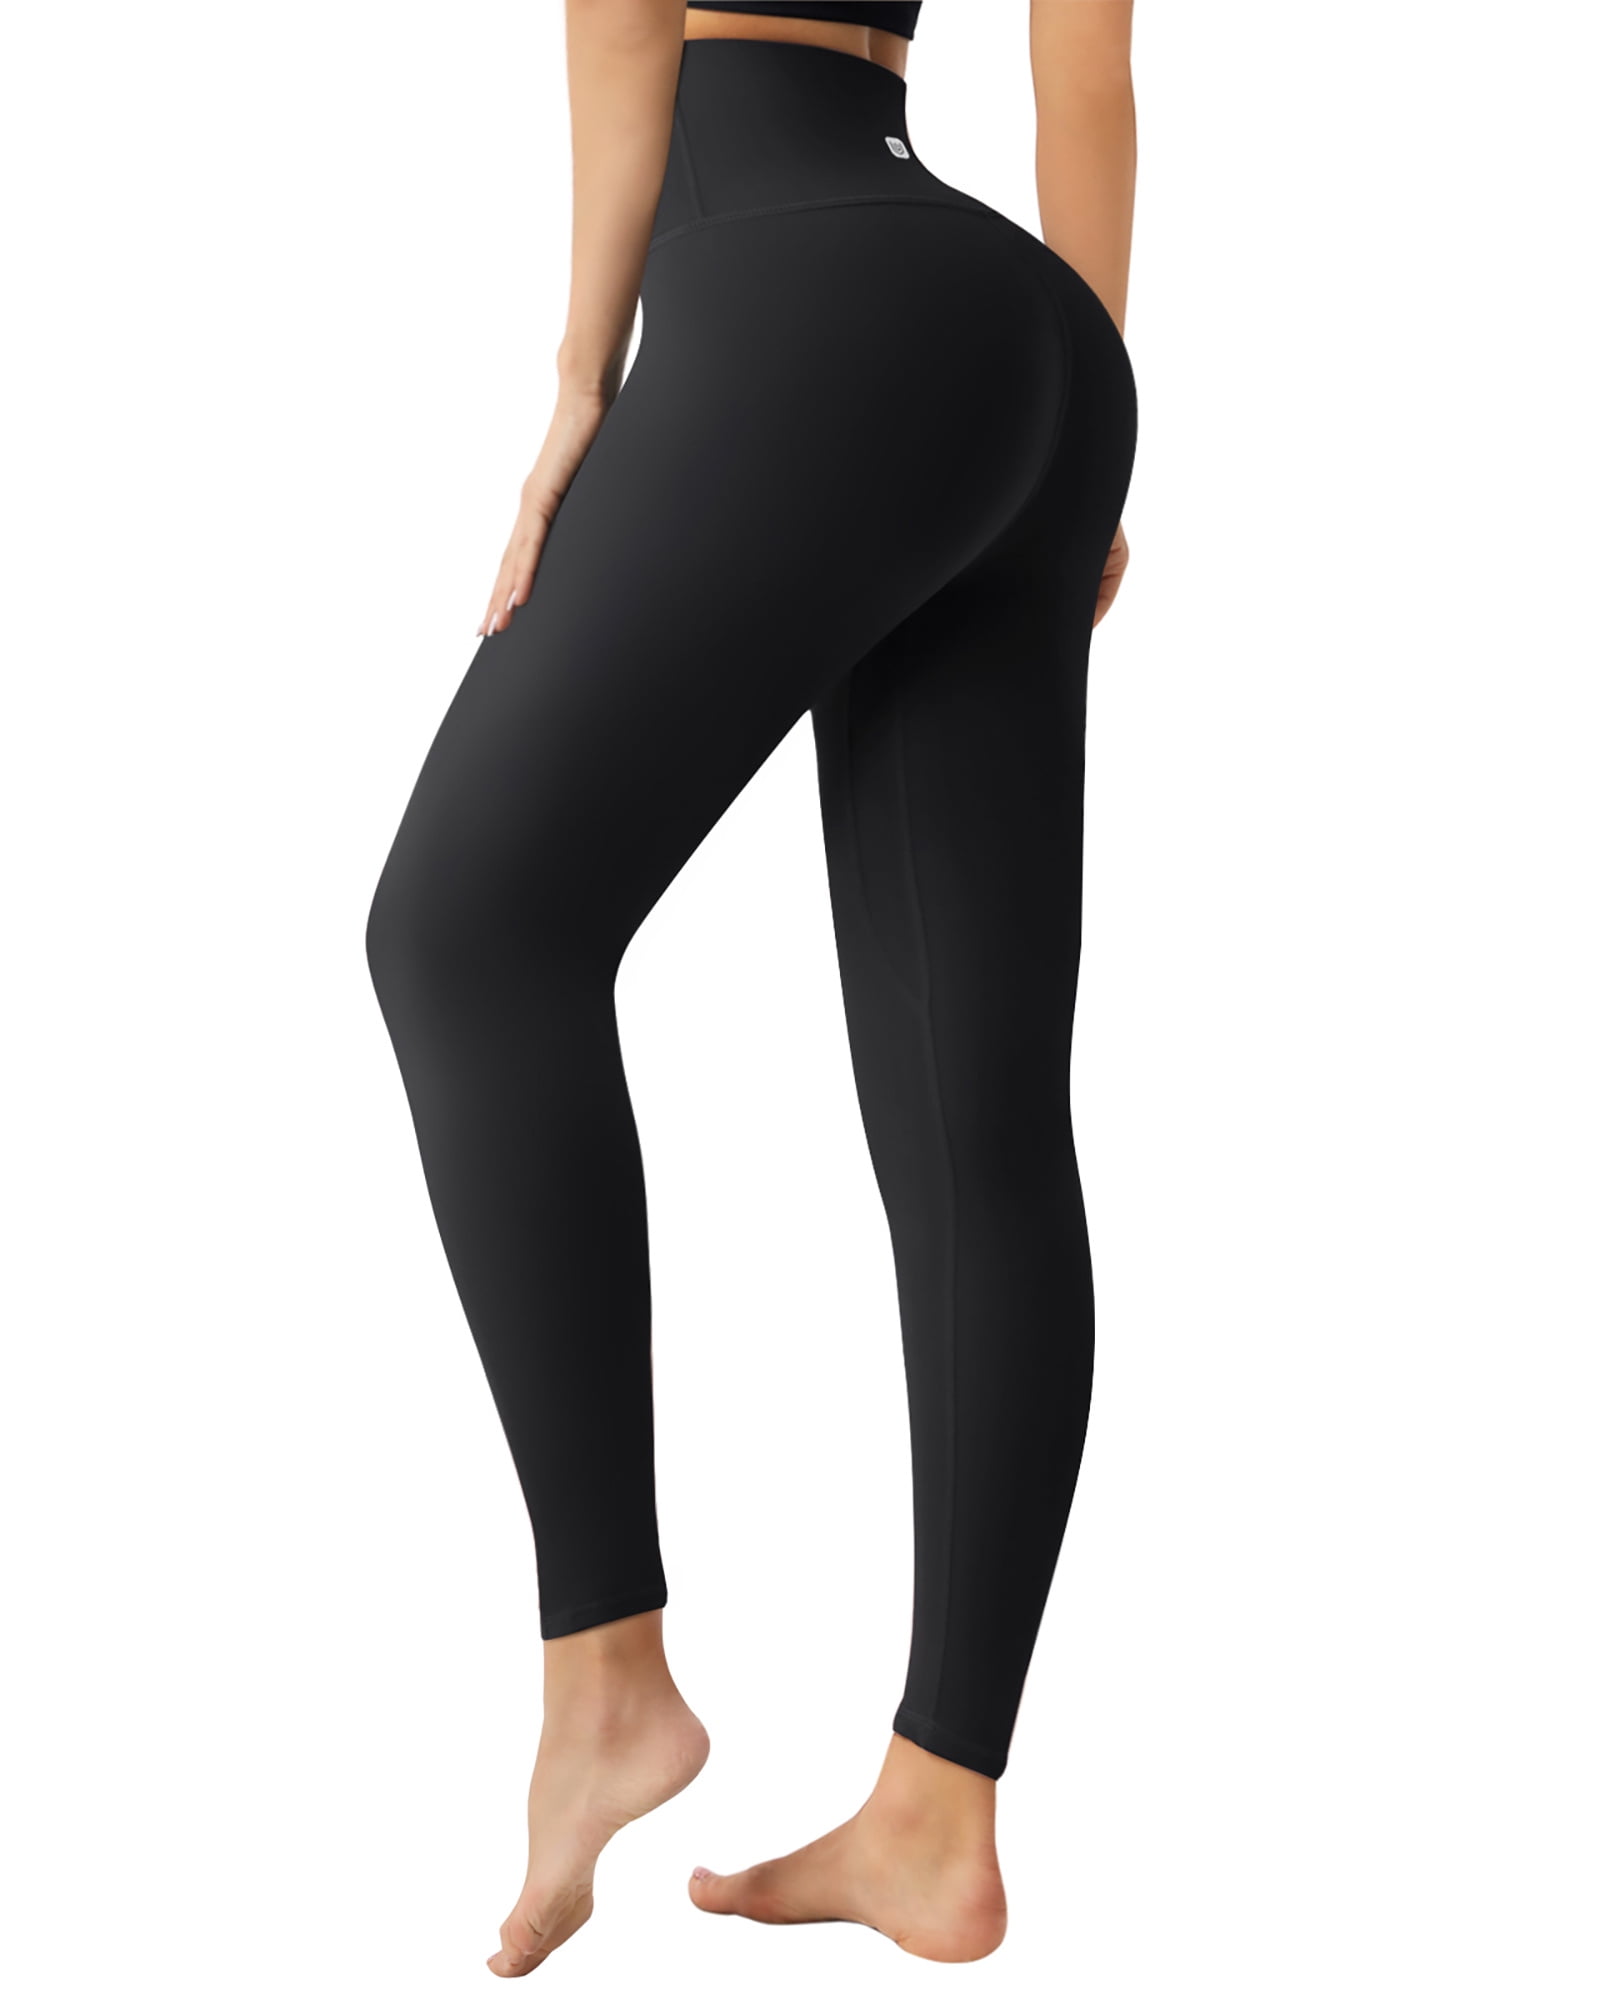  Zippy High Waist Thick Yoga Legging for Women - Tummy Control 25  Inseam Workout Pants, Buttery Soft with Waist Pocket Black-XS : Clothing,  Shoes & Jewelry